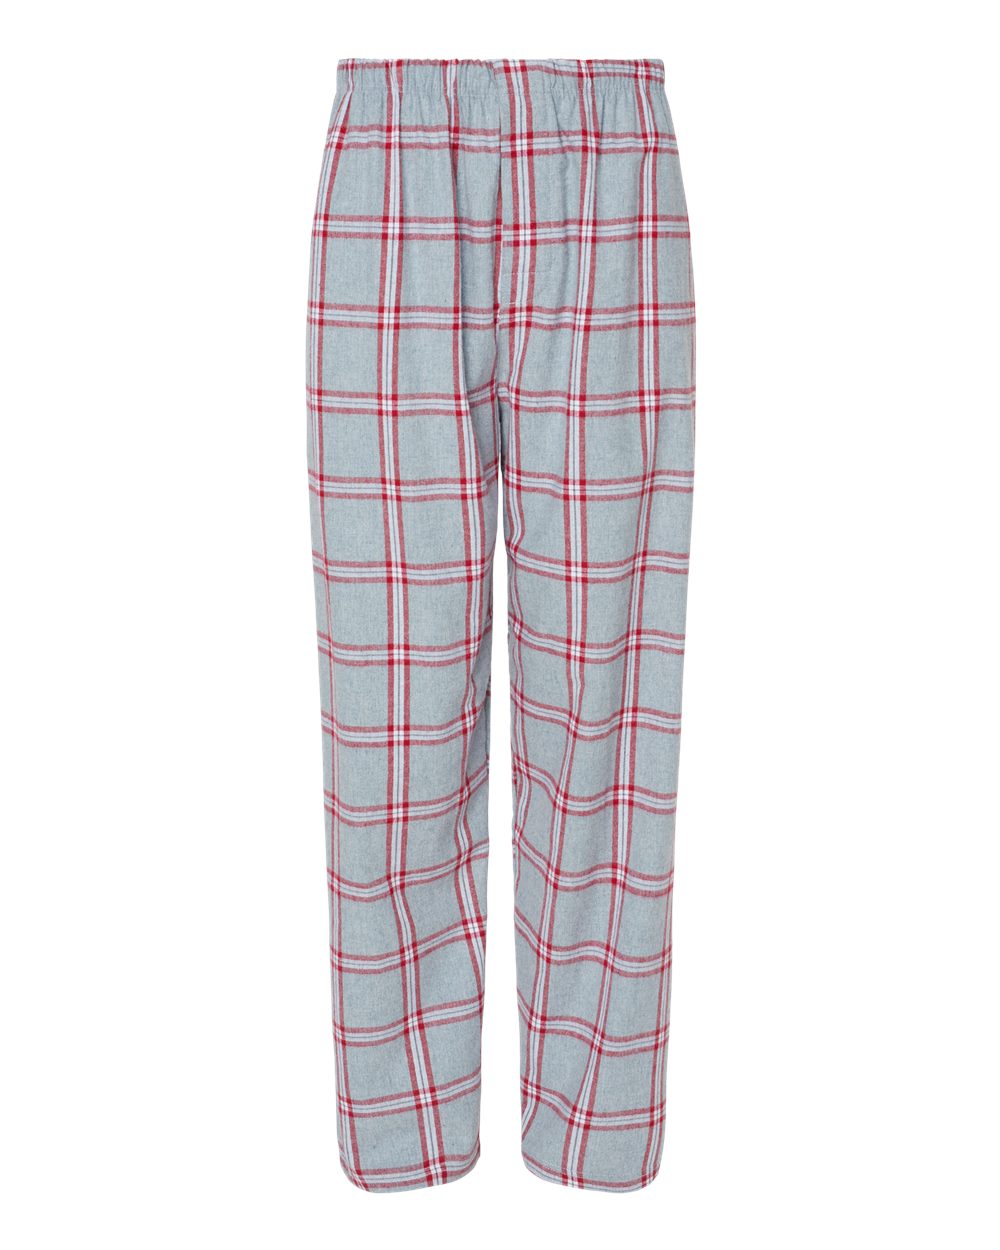 Boxercraft Unisex Flannel Pants Oxford and Red Flannel Pants with Custom Text